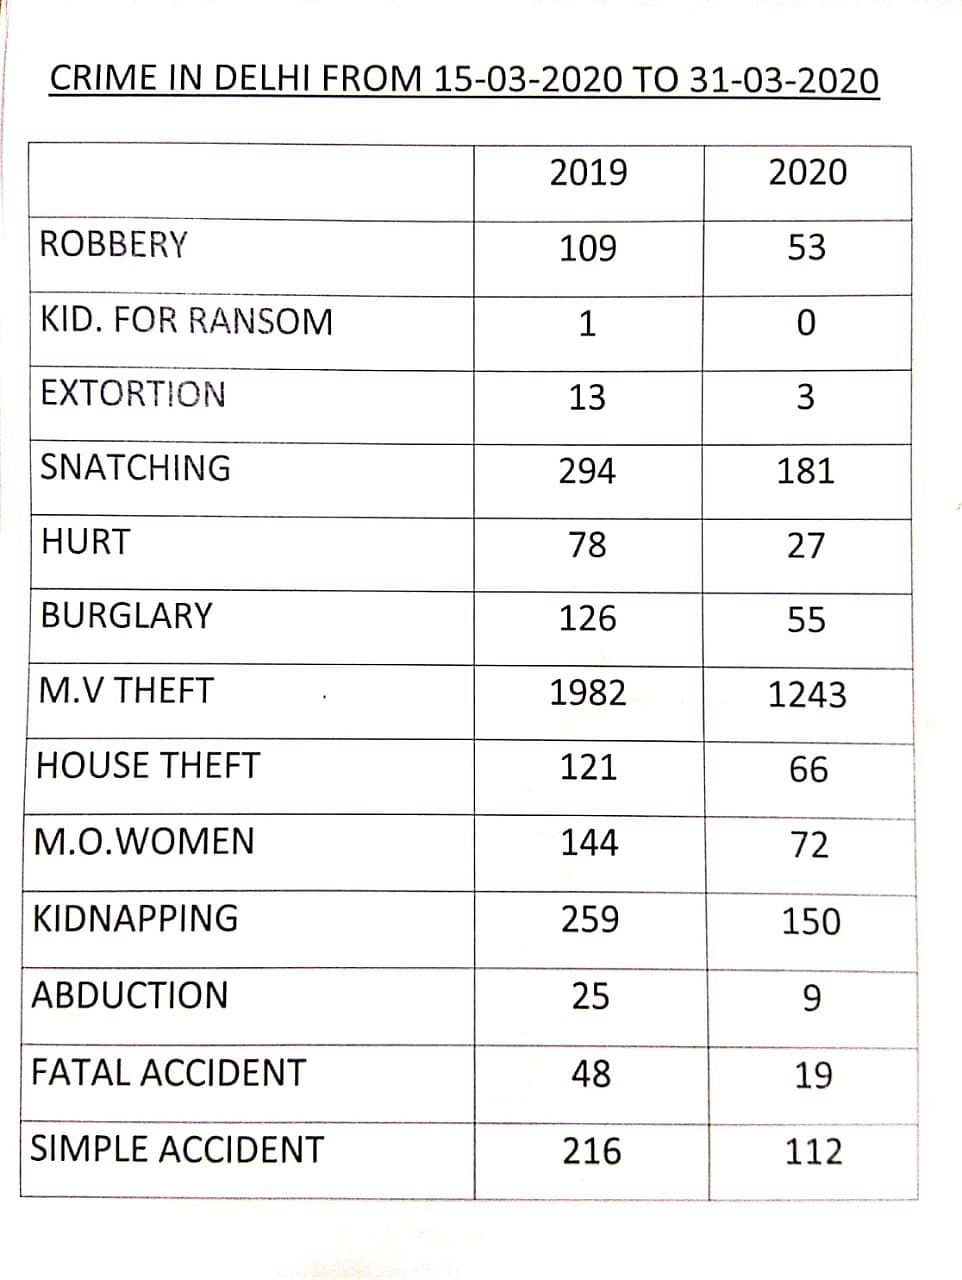 Crime in Delhi has dropped in between 15-31 March 2020, compared to the same period in March 2019, police said.